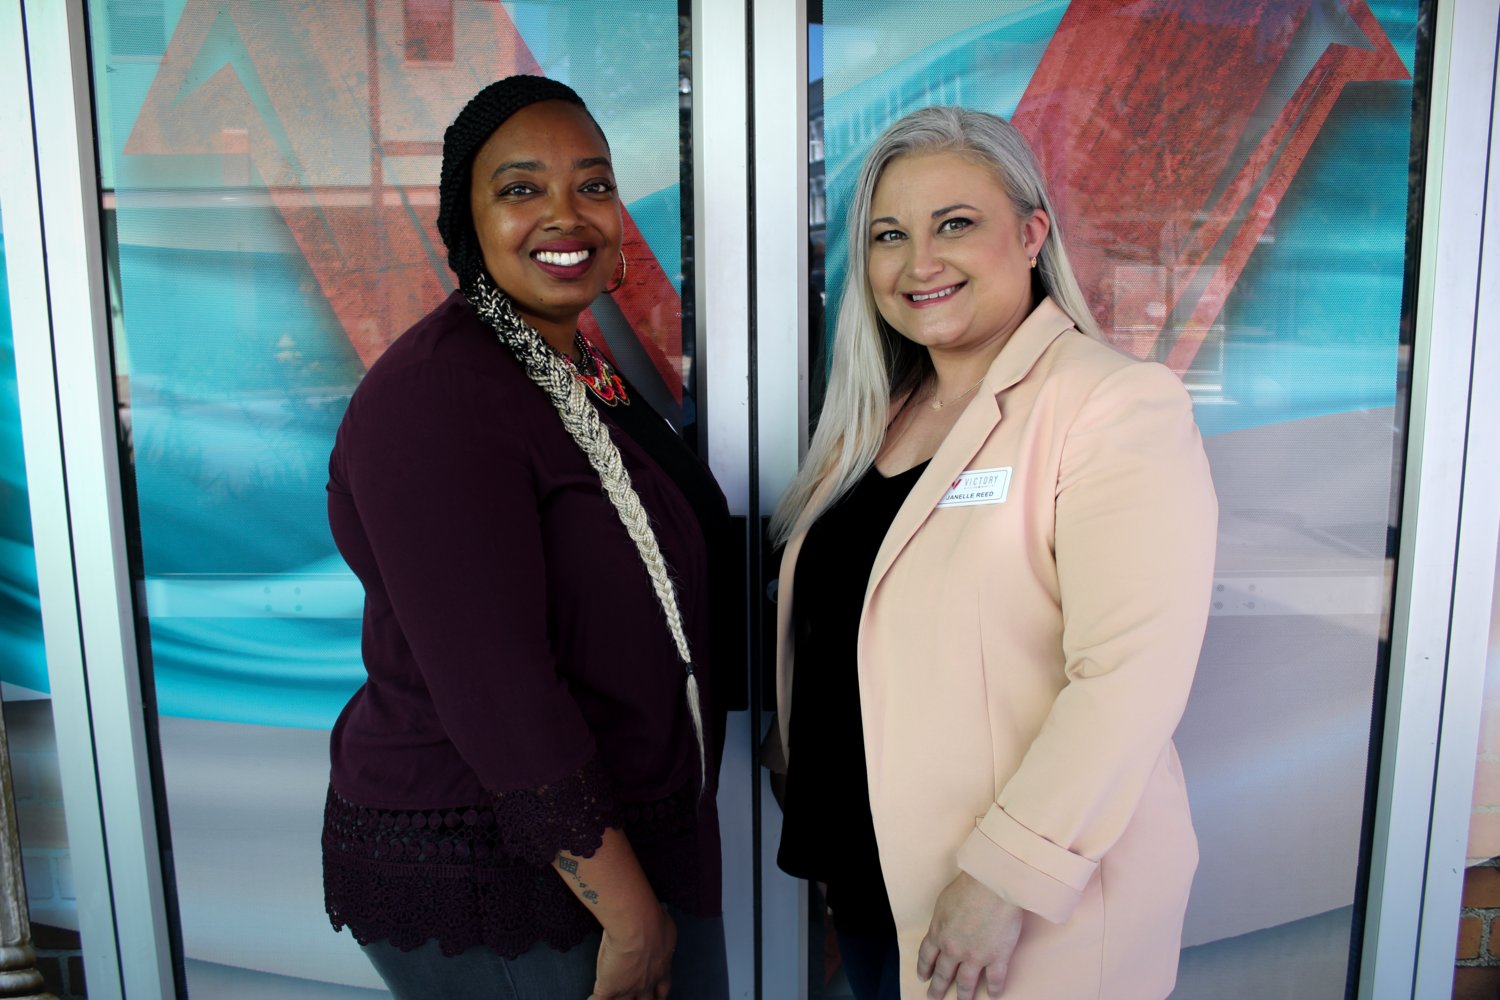 SingleMomzRock founder Janelle Reed, right, is succeeded as manager of the organization by Kendal Ford.